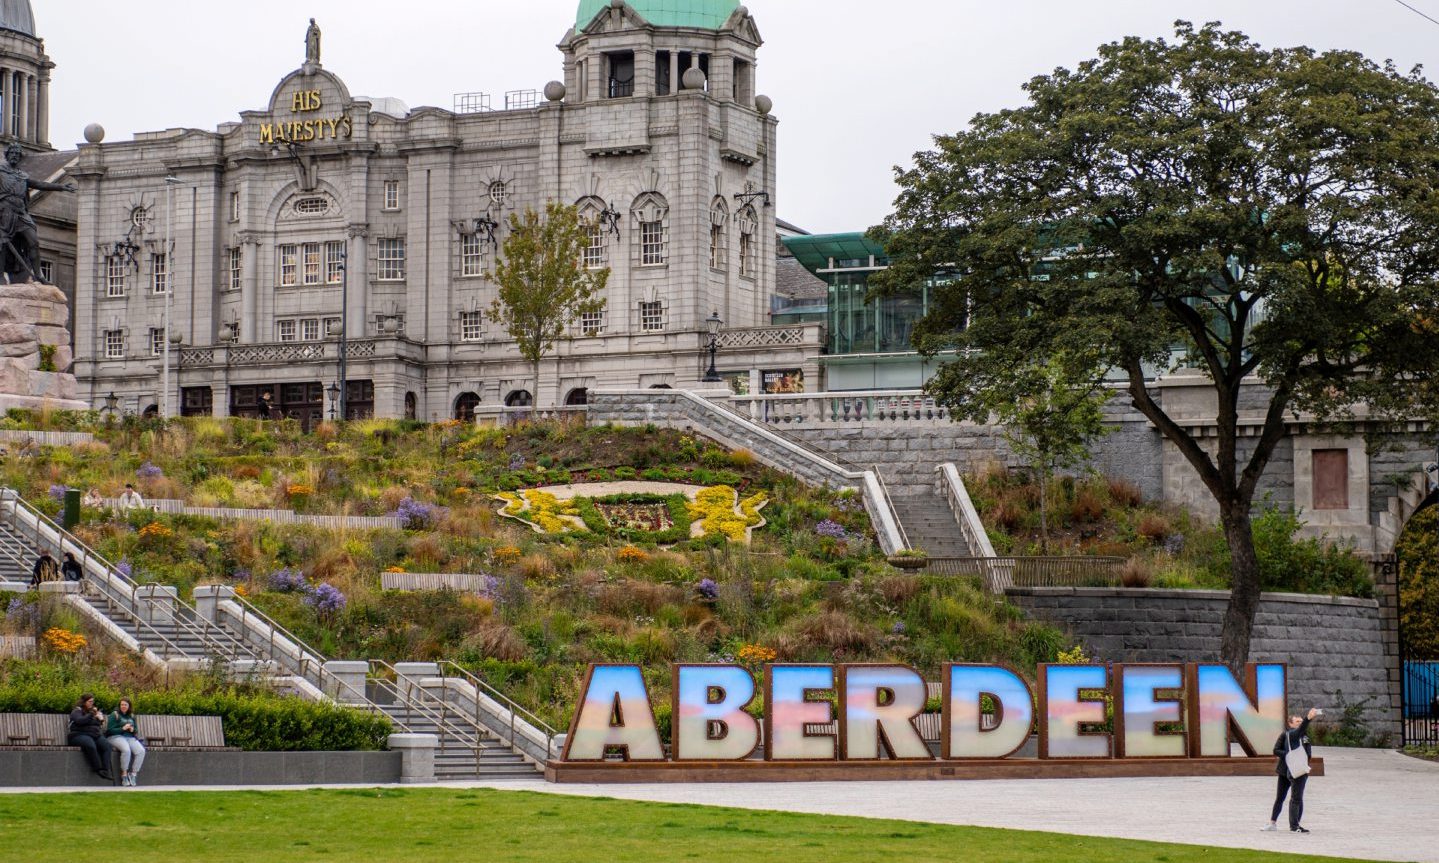 The Hollywood-style Aberdeen letters at Union Terrace Gardens.